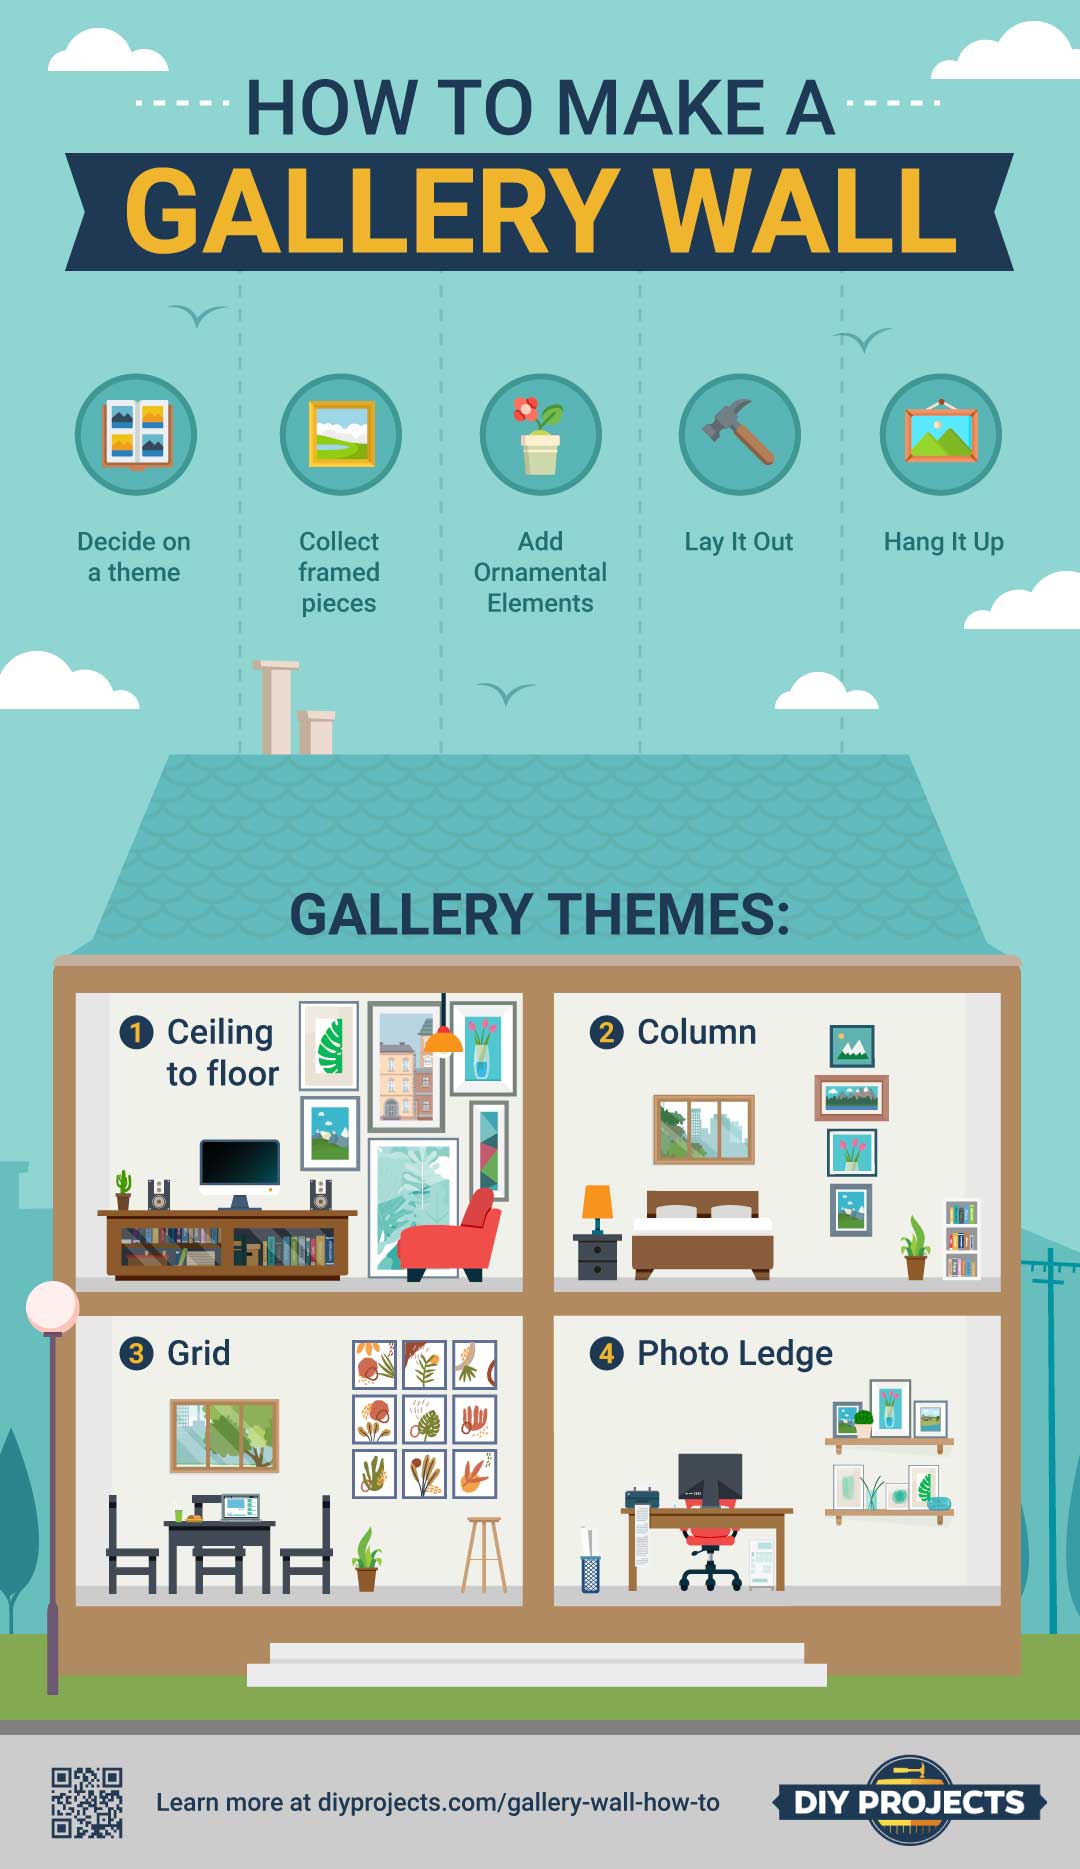 How To Make A Gallery Wall In Your Home [INFOGRAPHIC]